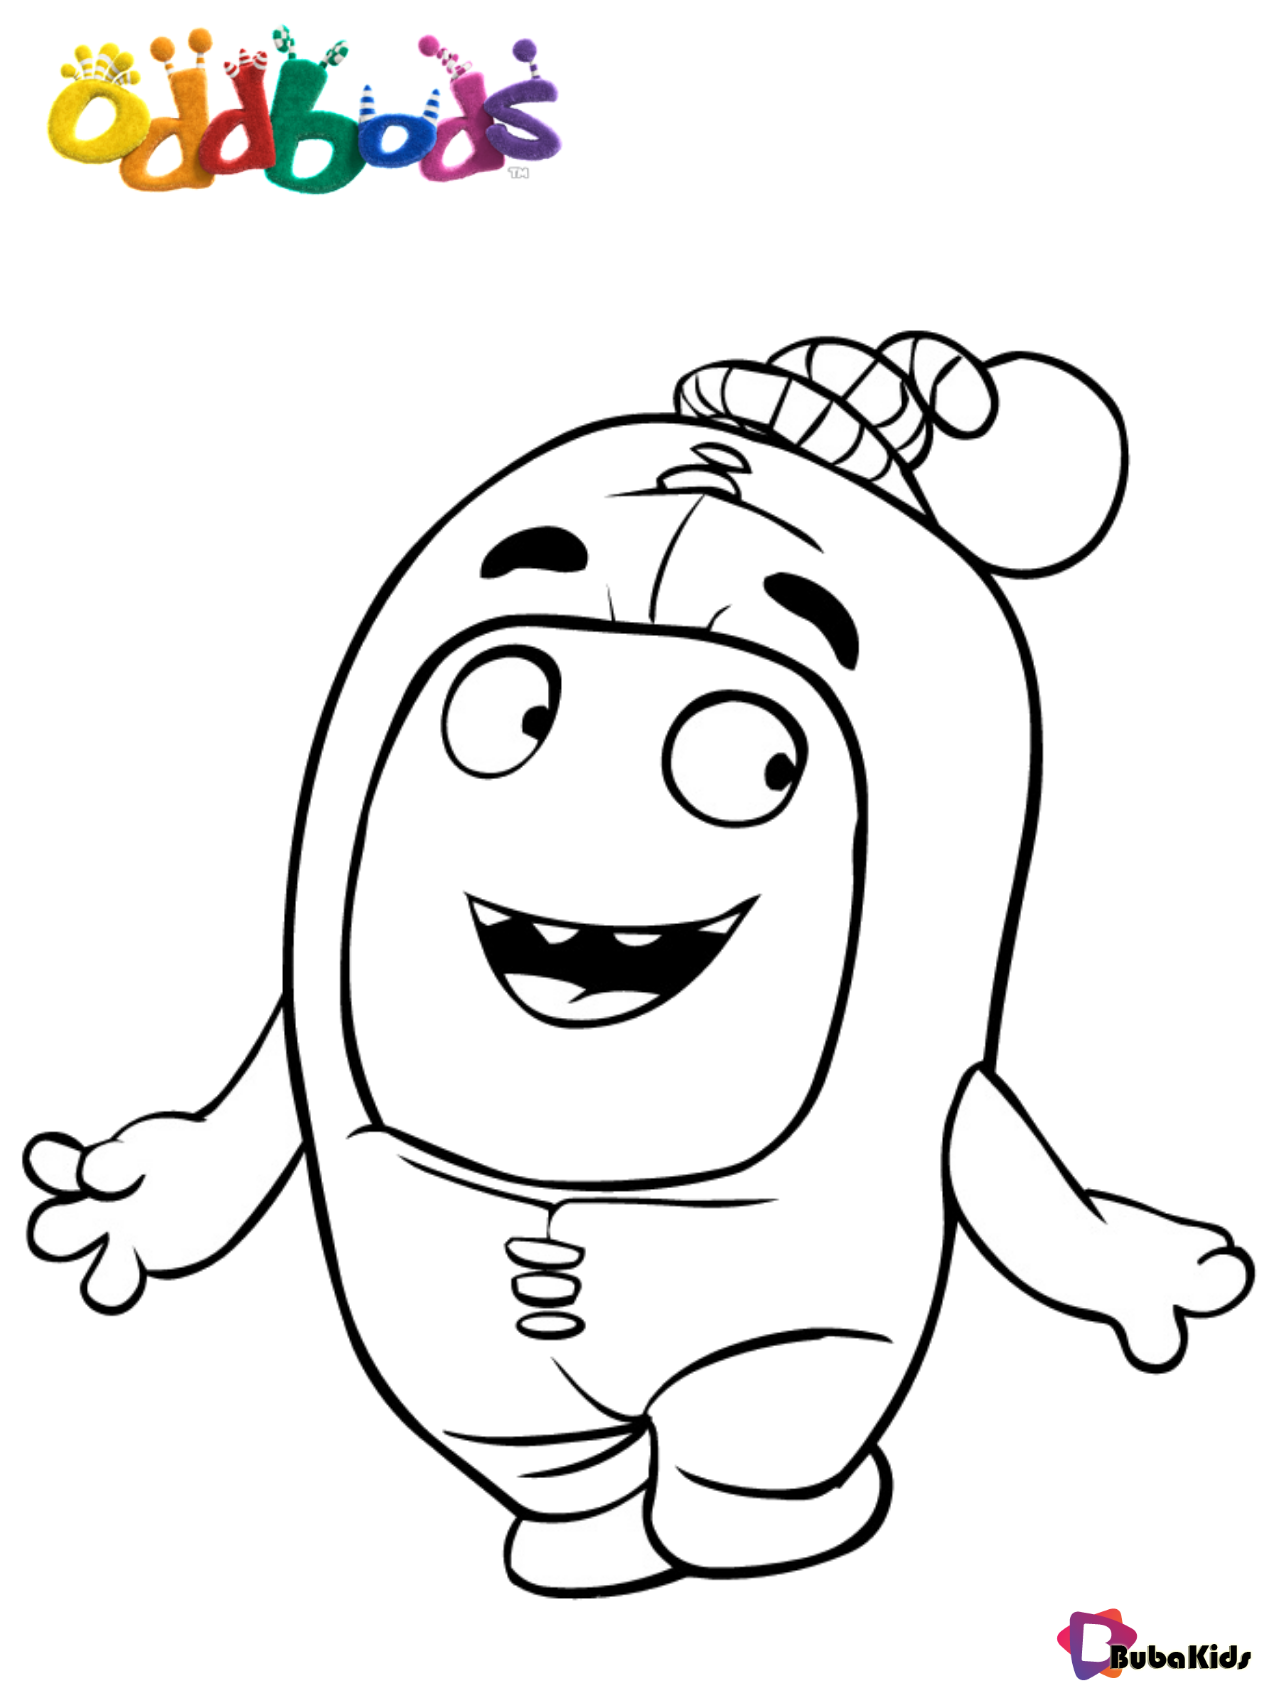 Oddbods newt free and printable coloring pages Wallpaper